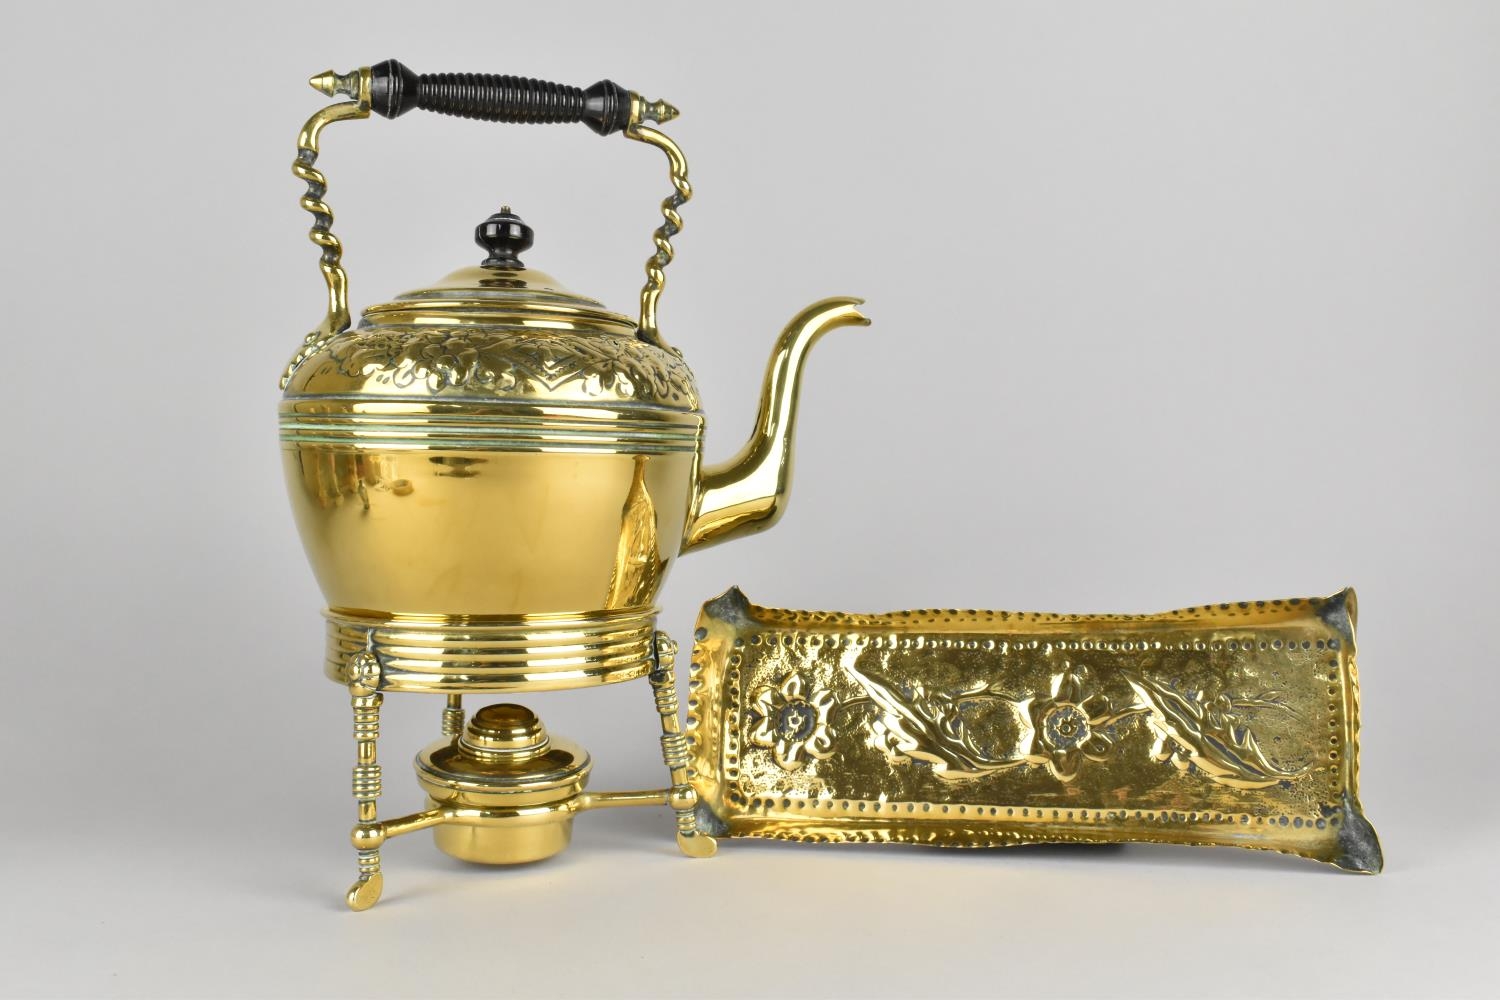 A Late 19th/Early 20th Century Brass Spirit Kettle on Stand and Burner with Hand Beaten Decoration